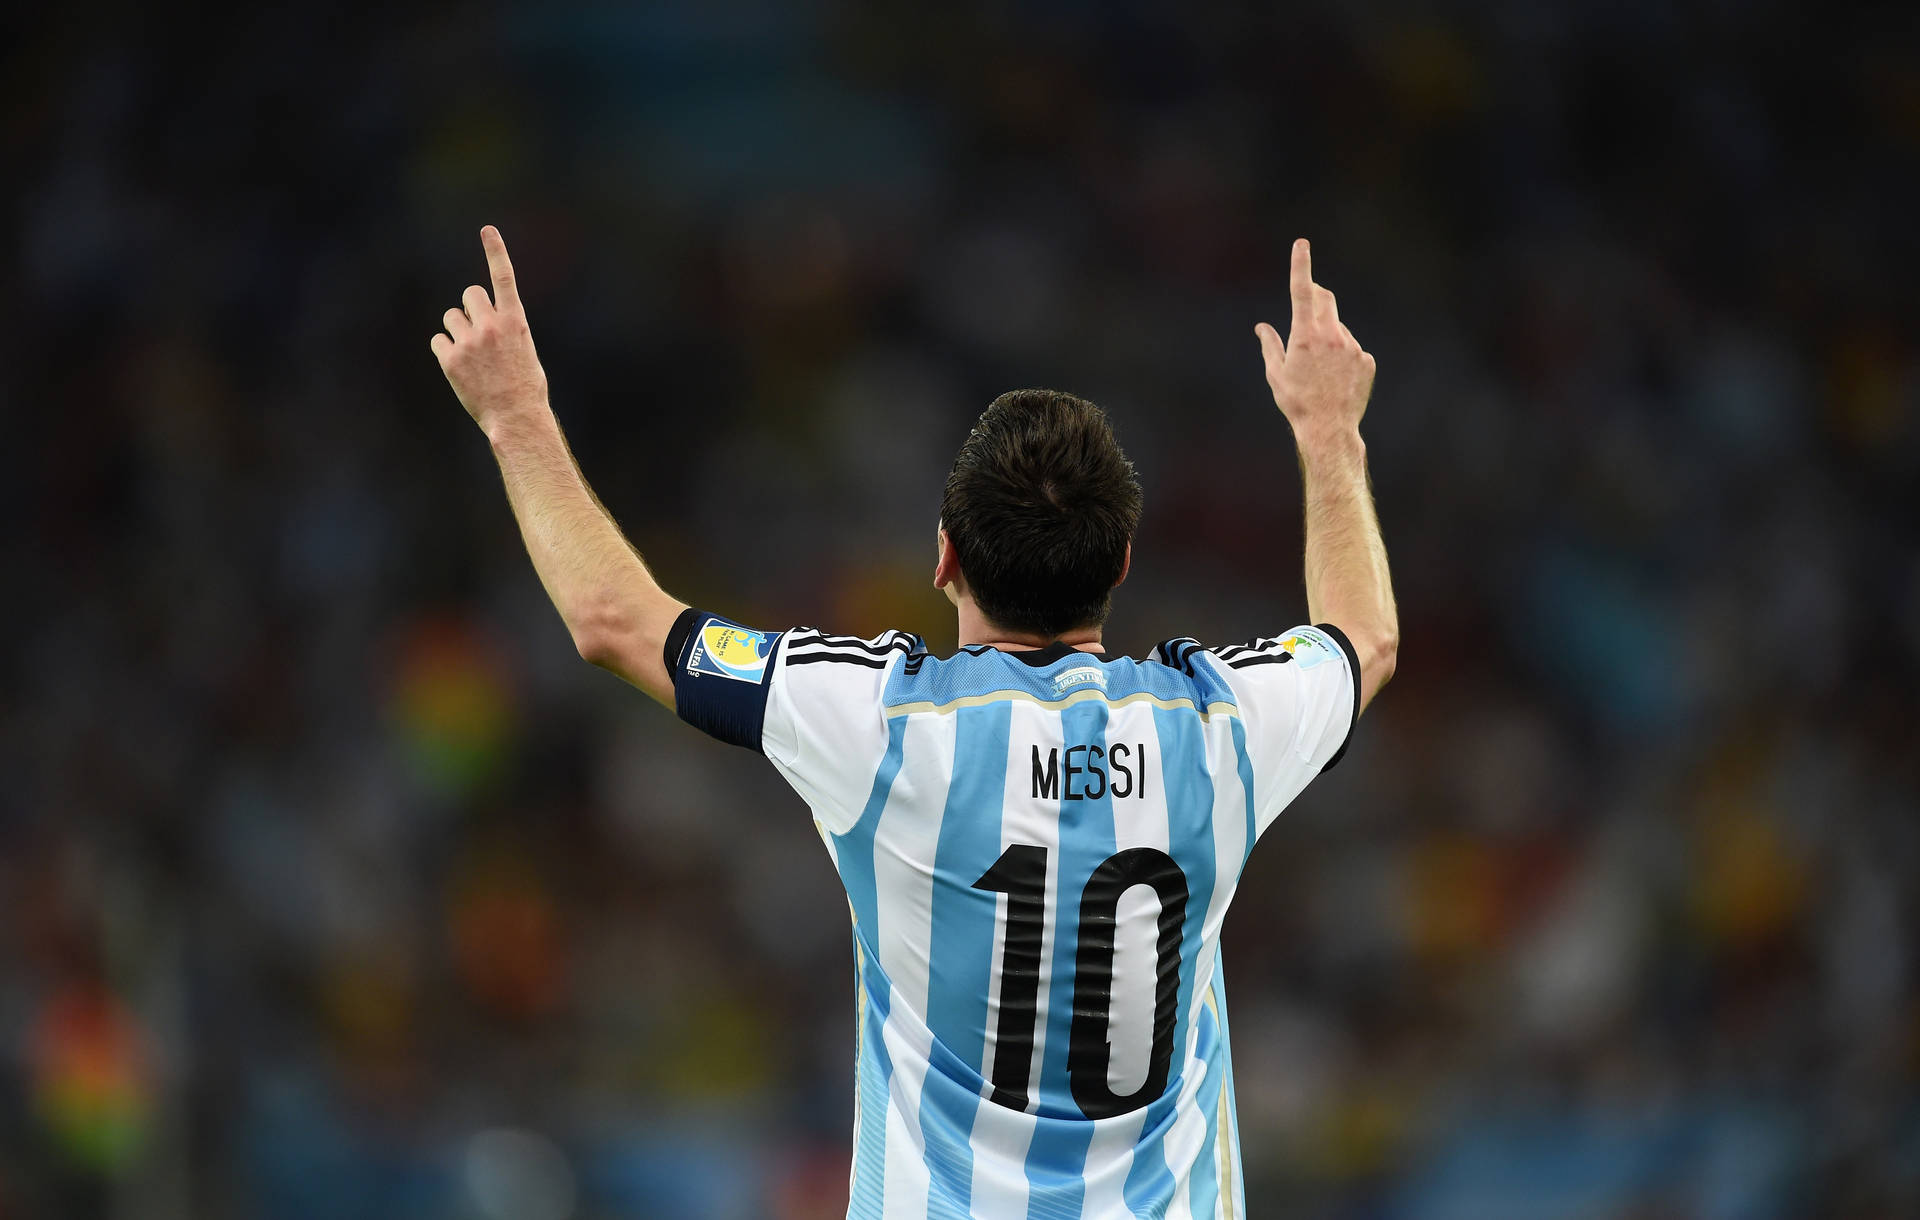 Lionel Messi With Head Held High Wallpaper